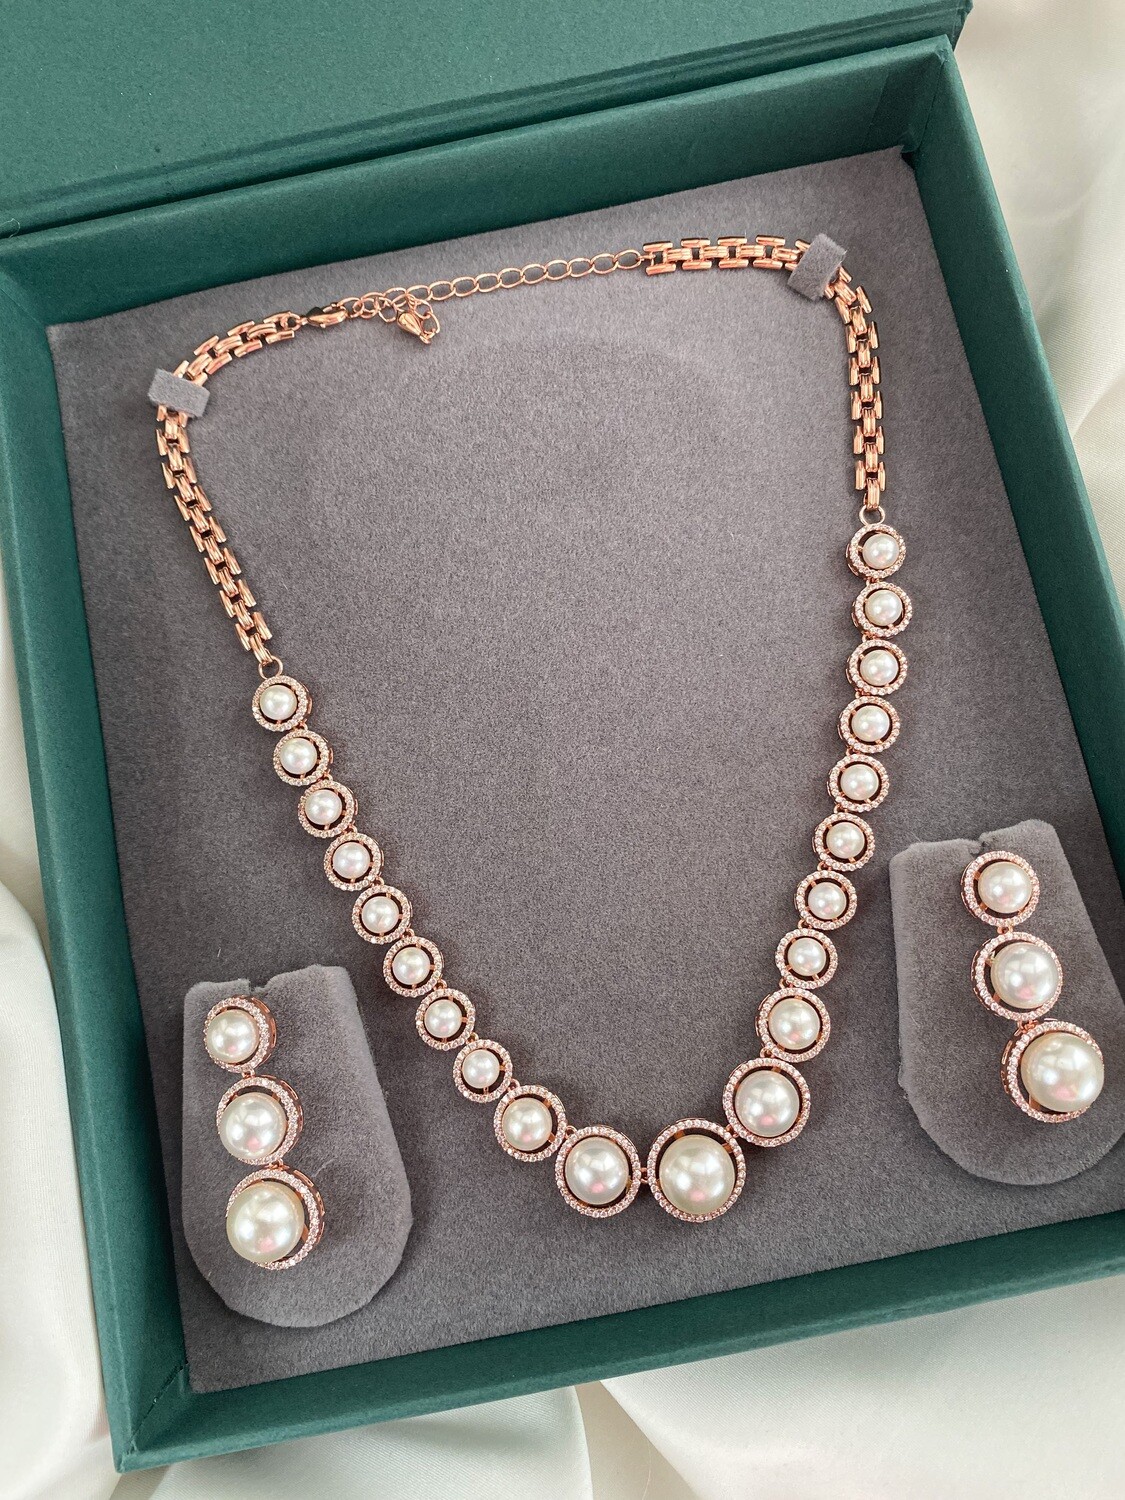 Naolli Cz Pearls Rosegold Riviere Necklace Set